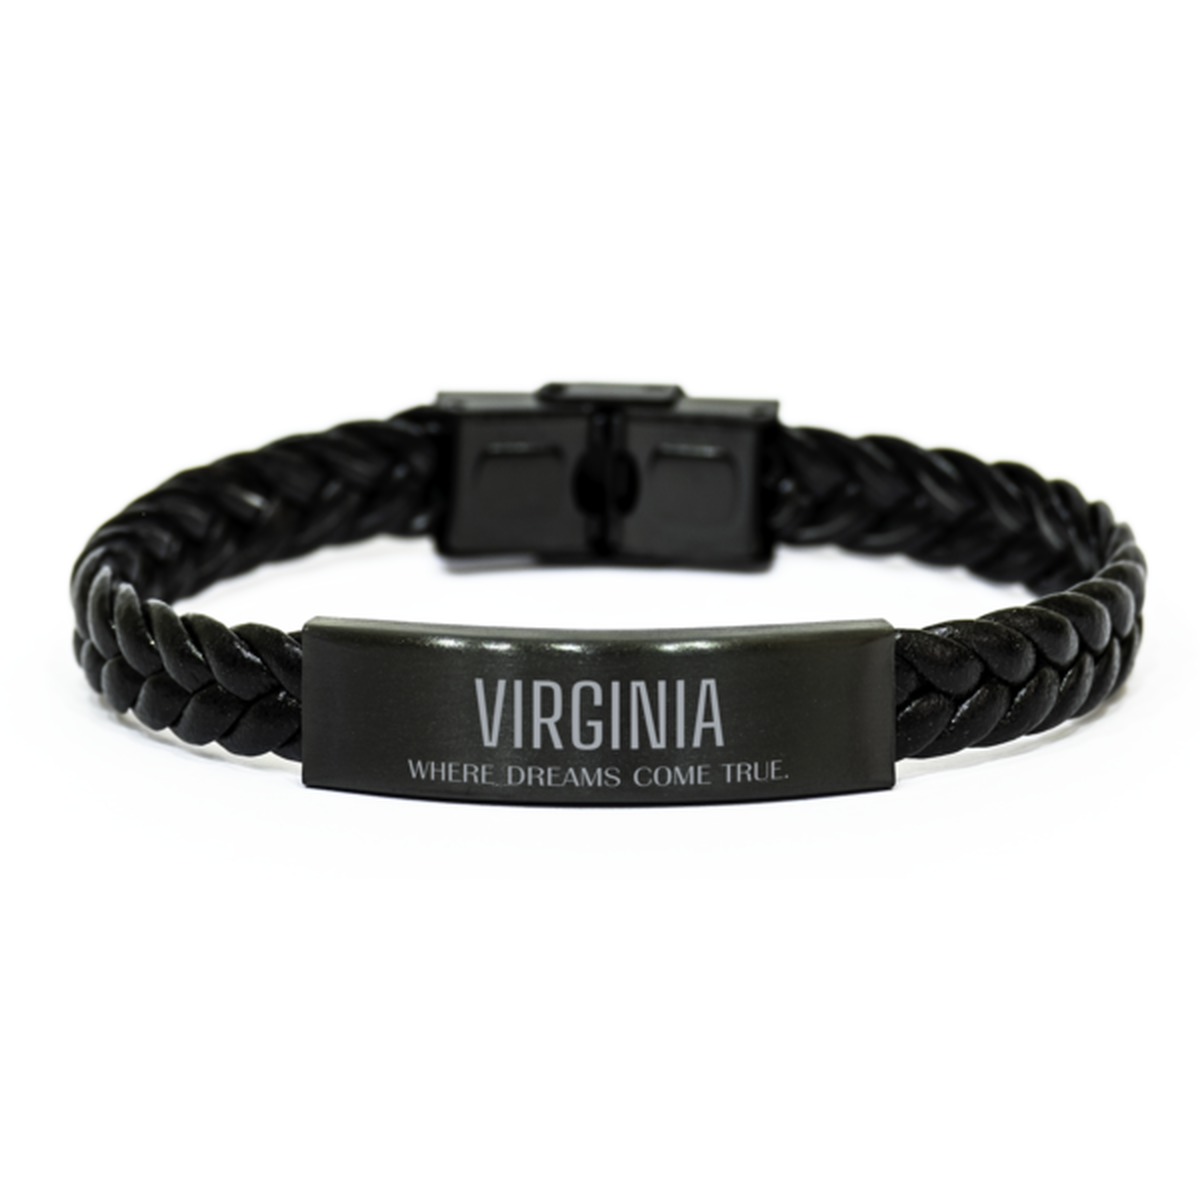 Love Virginia State Braided Leather Bracelet, Virginia Where dreams come true, Birthday Inspirational Gifts For Virginia Men, Women, Friends